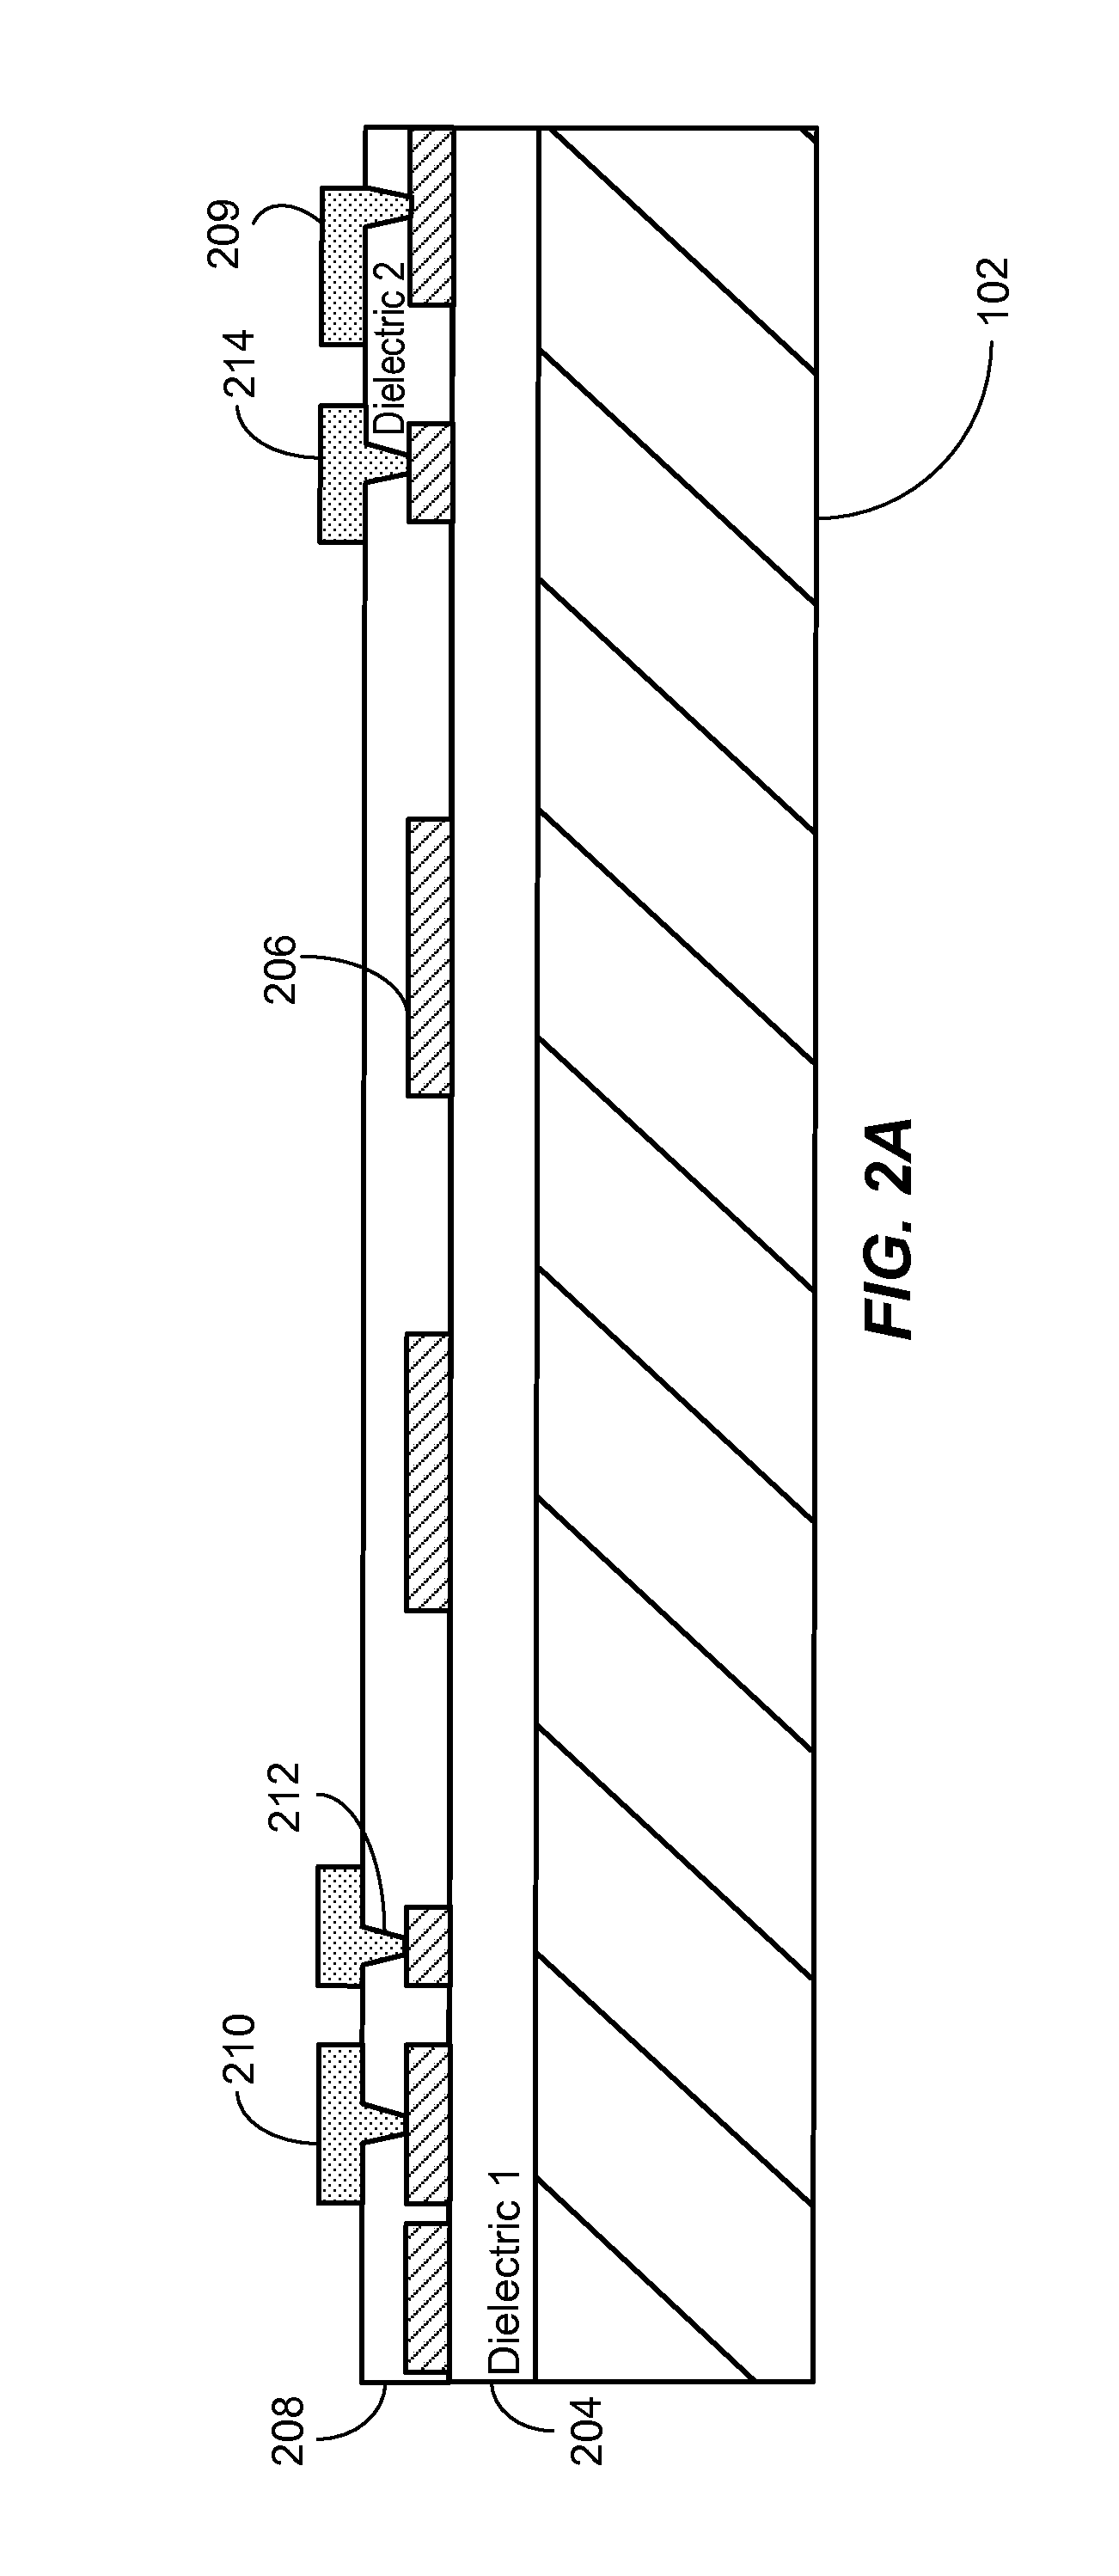 Method and system for MEMS devices